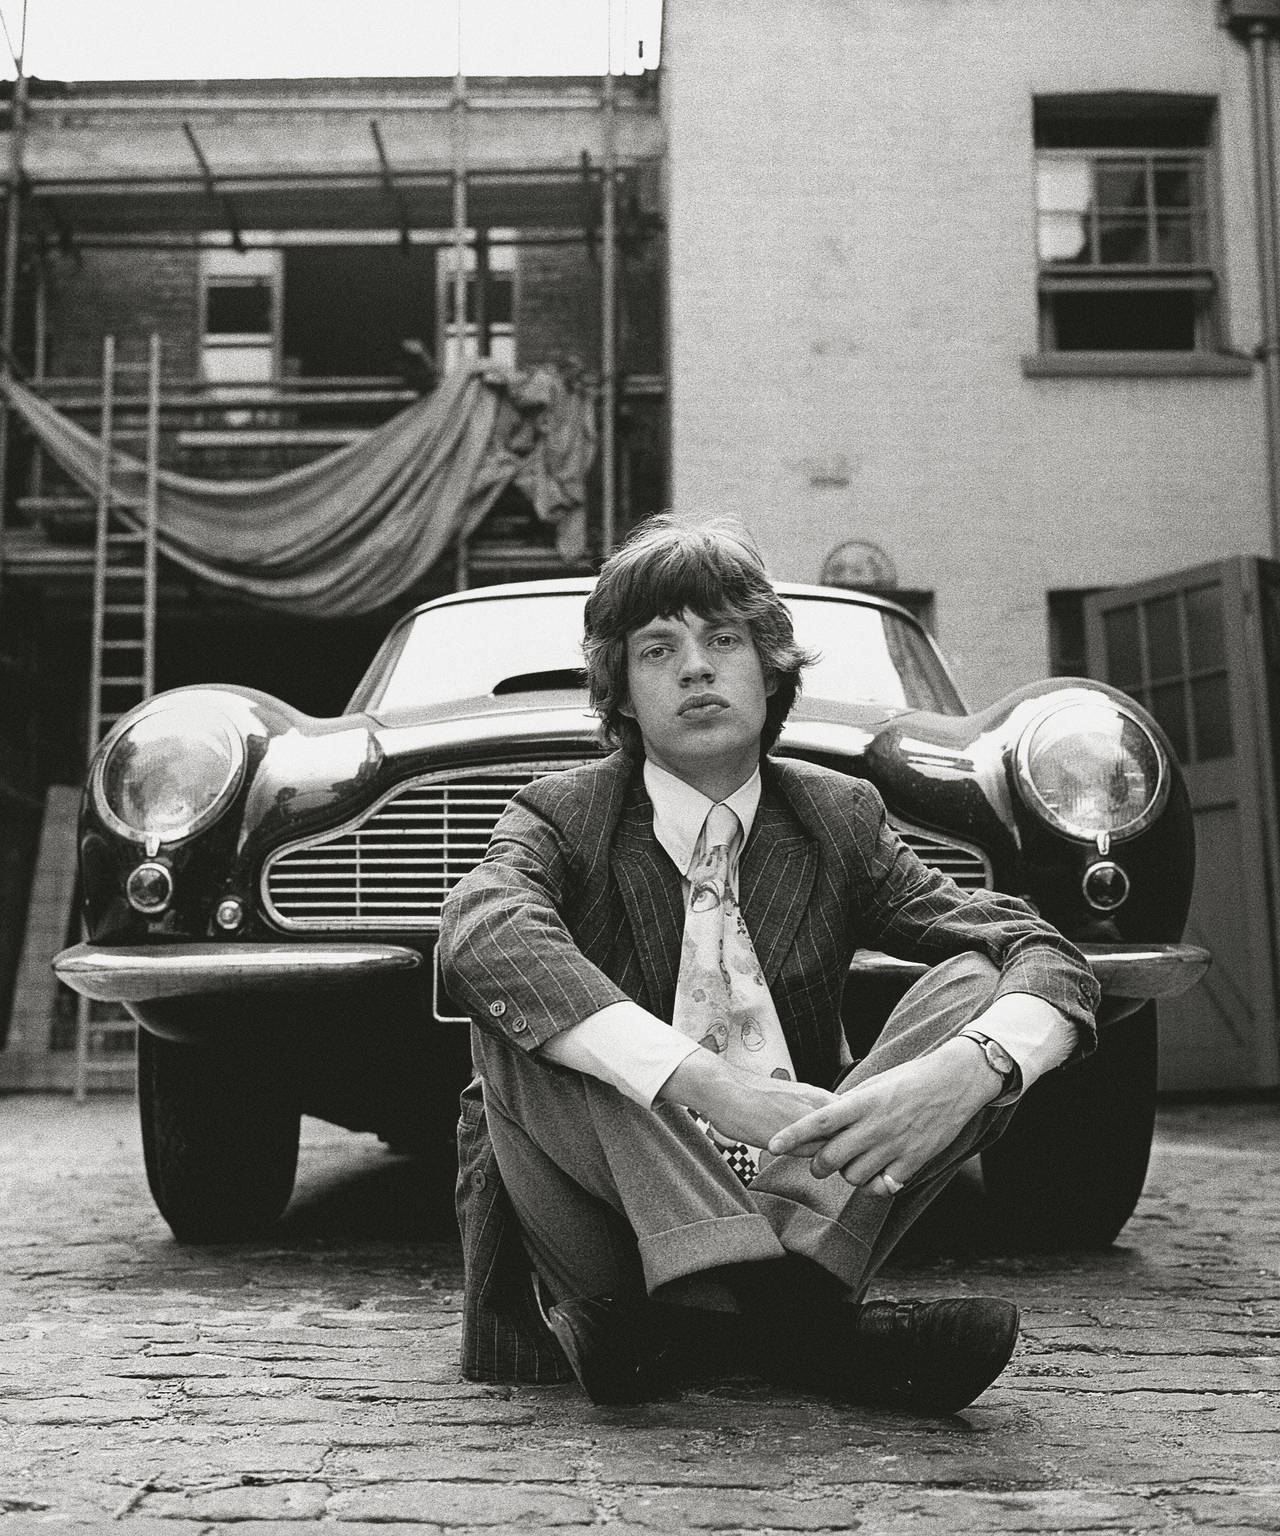 Gered Mankowitz Portrait Photograph - Mick Jagger and Aston Martin, 1966, Signed, Limited, Silver Gelatin Print